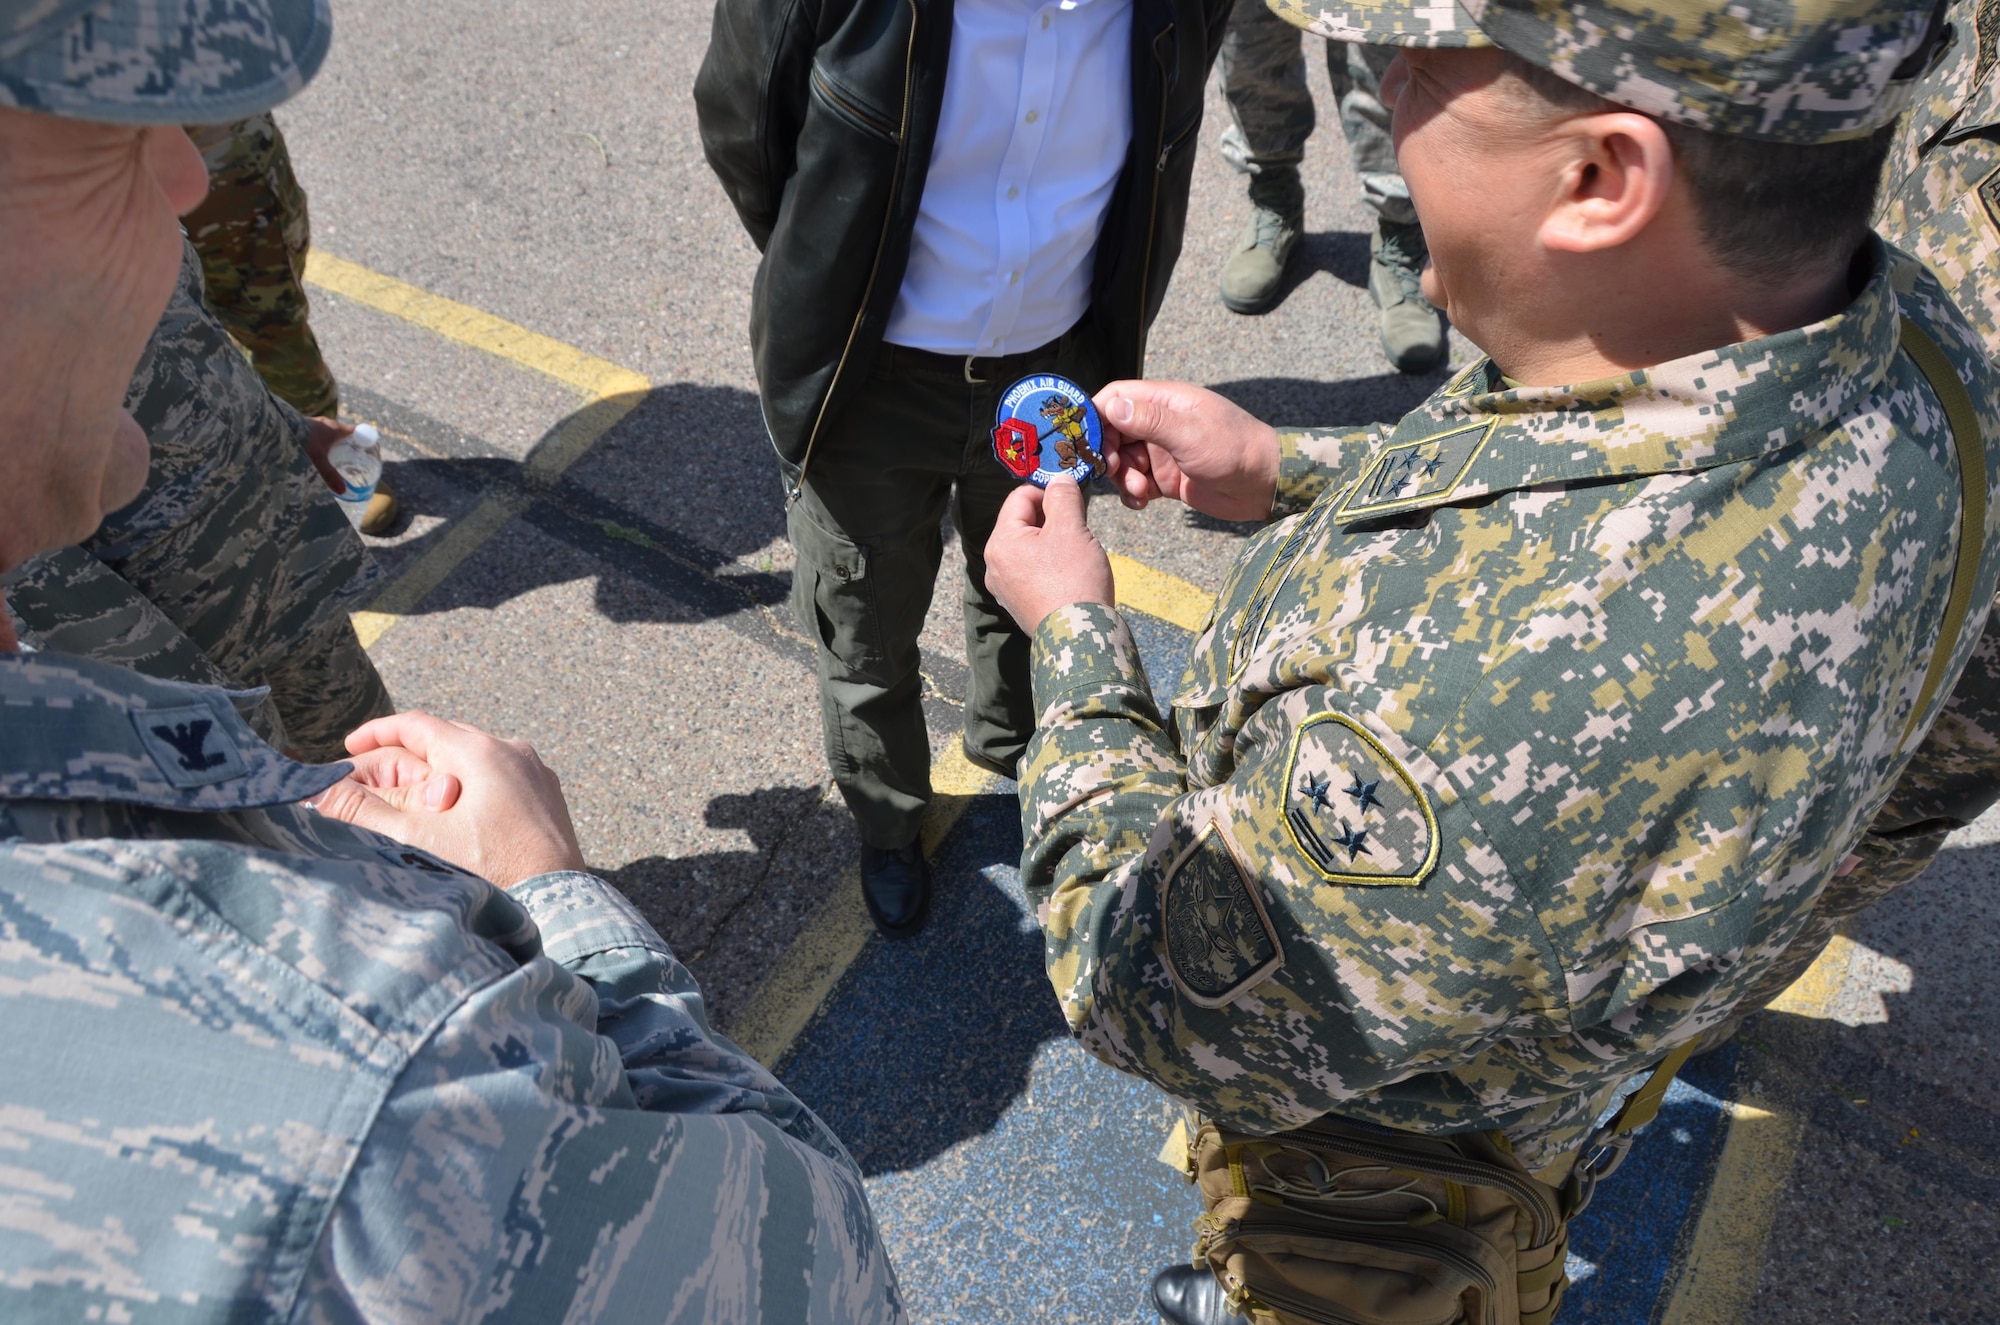 Air Force Col. Troy Daniels (left), vice commander of the 161st Air Refueling Wing, gives a unit patch to a military officer from the Republic of Kazakhstan as a memento, March 31. The wing hosted a Kazakh delegation visit to exchange ideas on emergency management. Kazakhstan and Arizona have been partners in the National Guard’s State Partnership Program since 1993. (U.S. Air National Guard photo by 2nd Lt. Tinashe Machona).